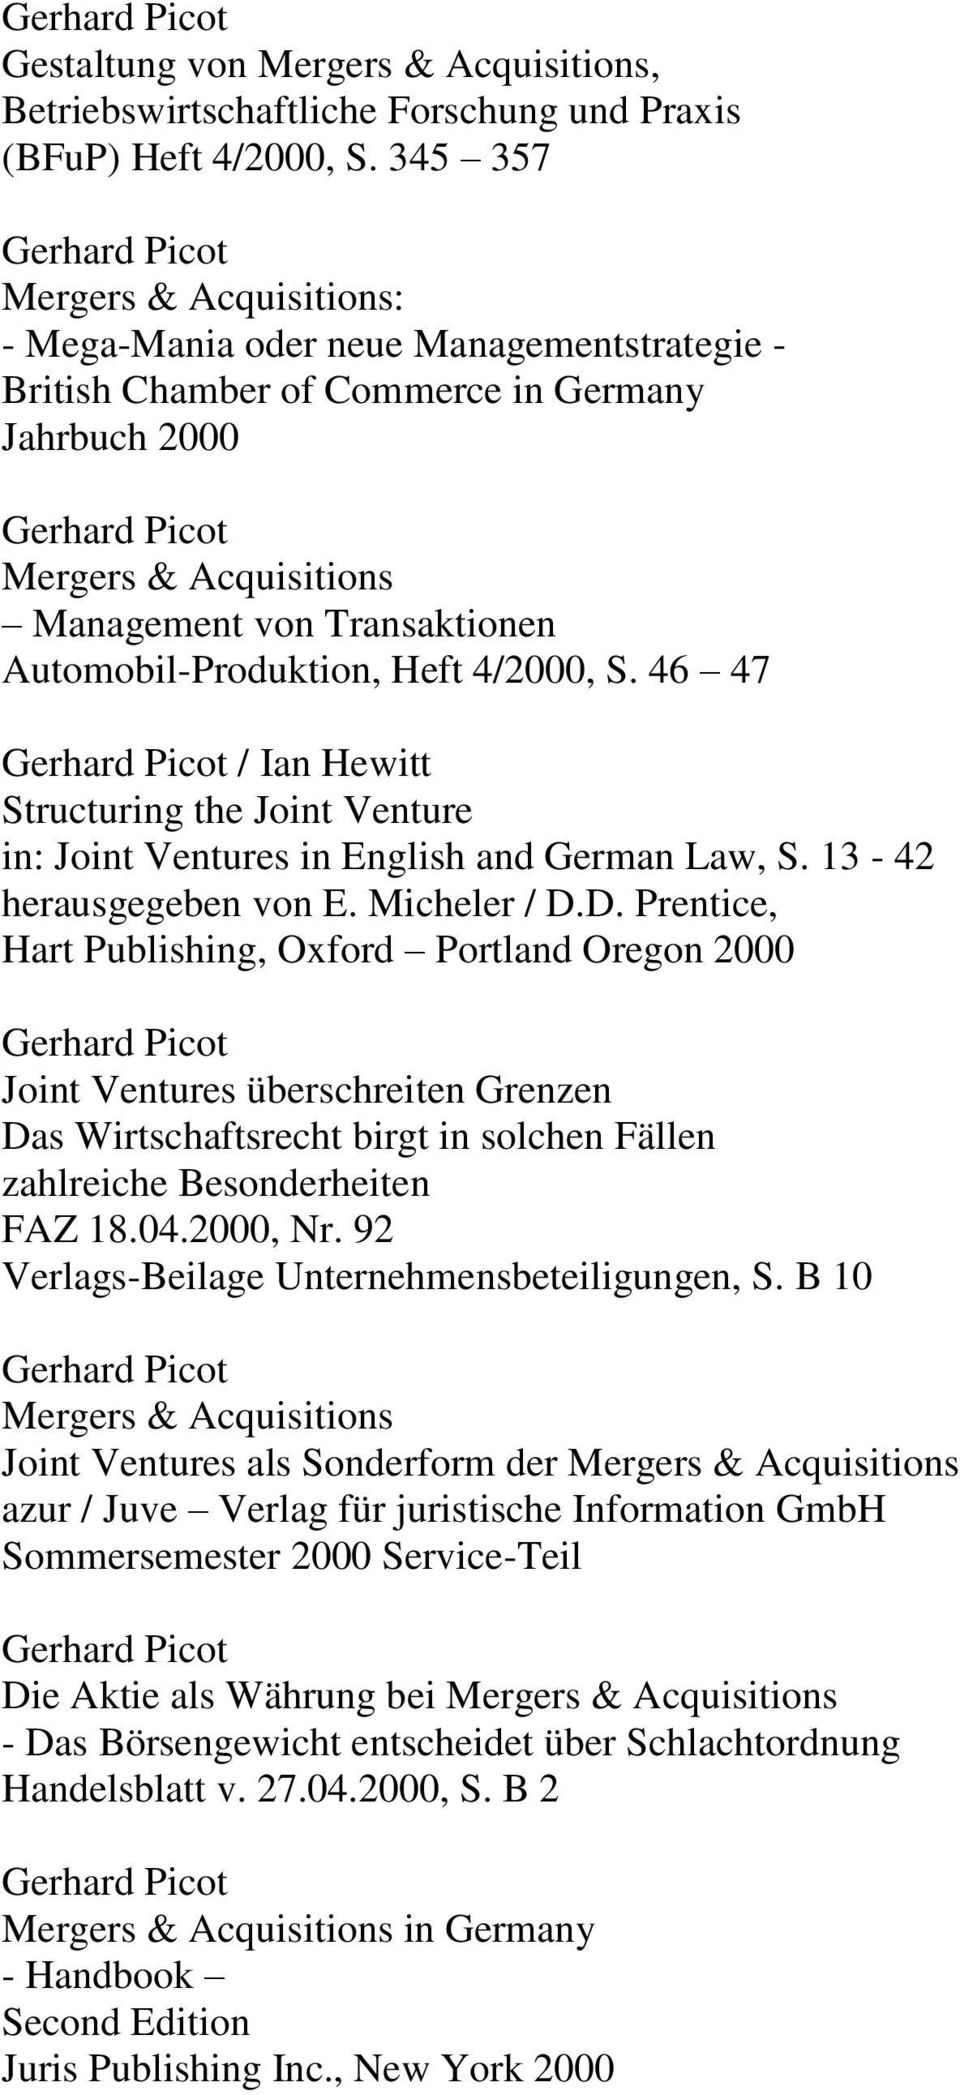 Automobil-Produktion, Heft 4/2000, S. 46 47 / Ian Hewitt Structuring the Joint Venture in: Joint Ventures in English and German Law, S. 13-42 herausgegeben von E. Micheler / D.